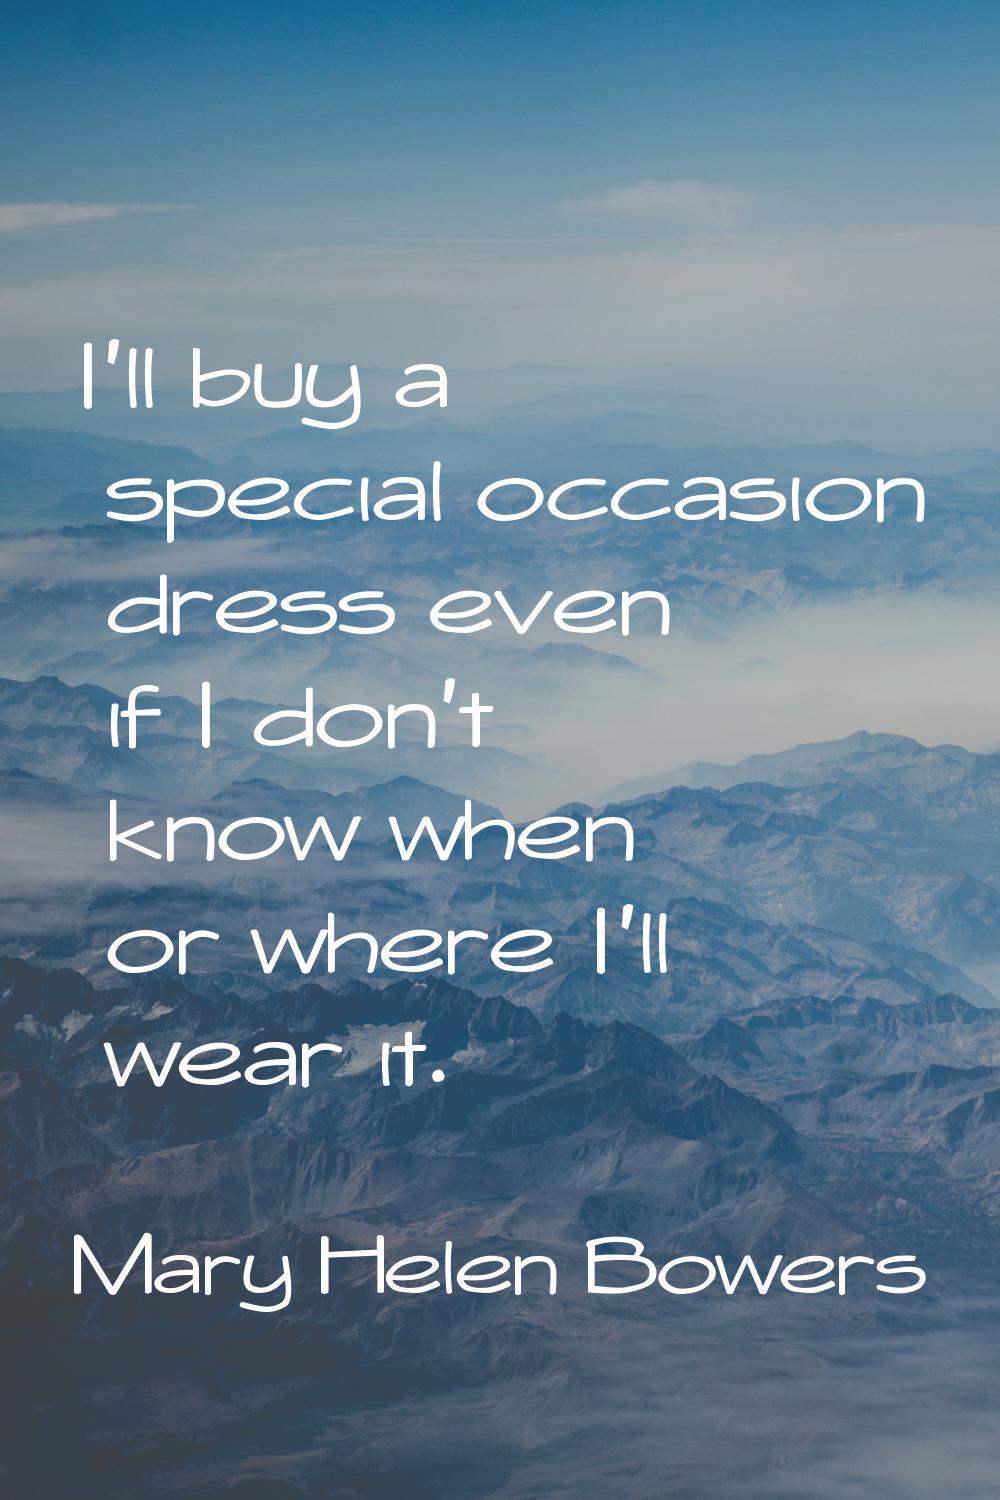 I'll buy a special occasion dress even if I don't know when or where I'll wear it.